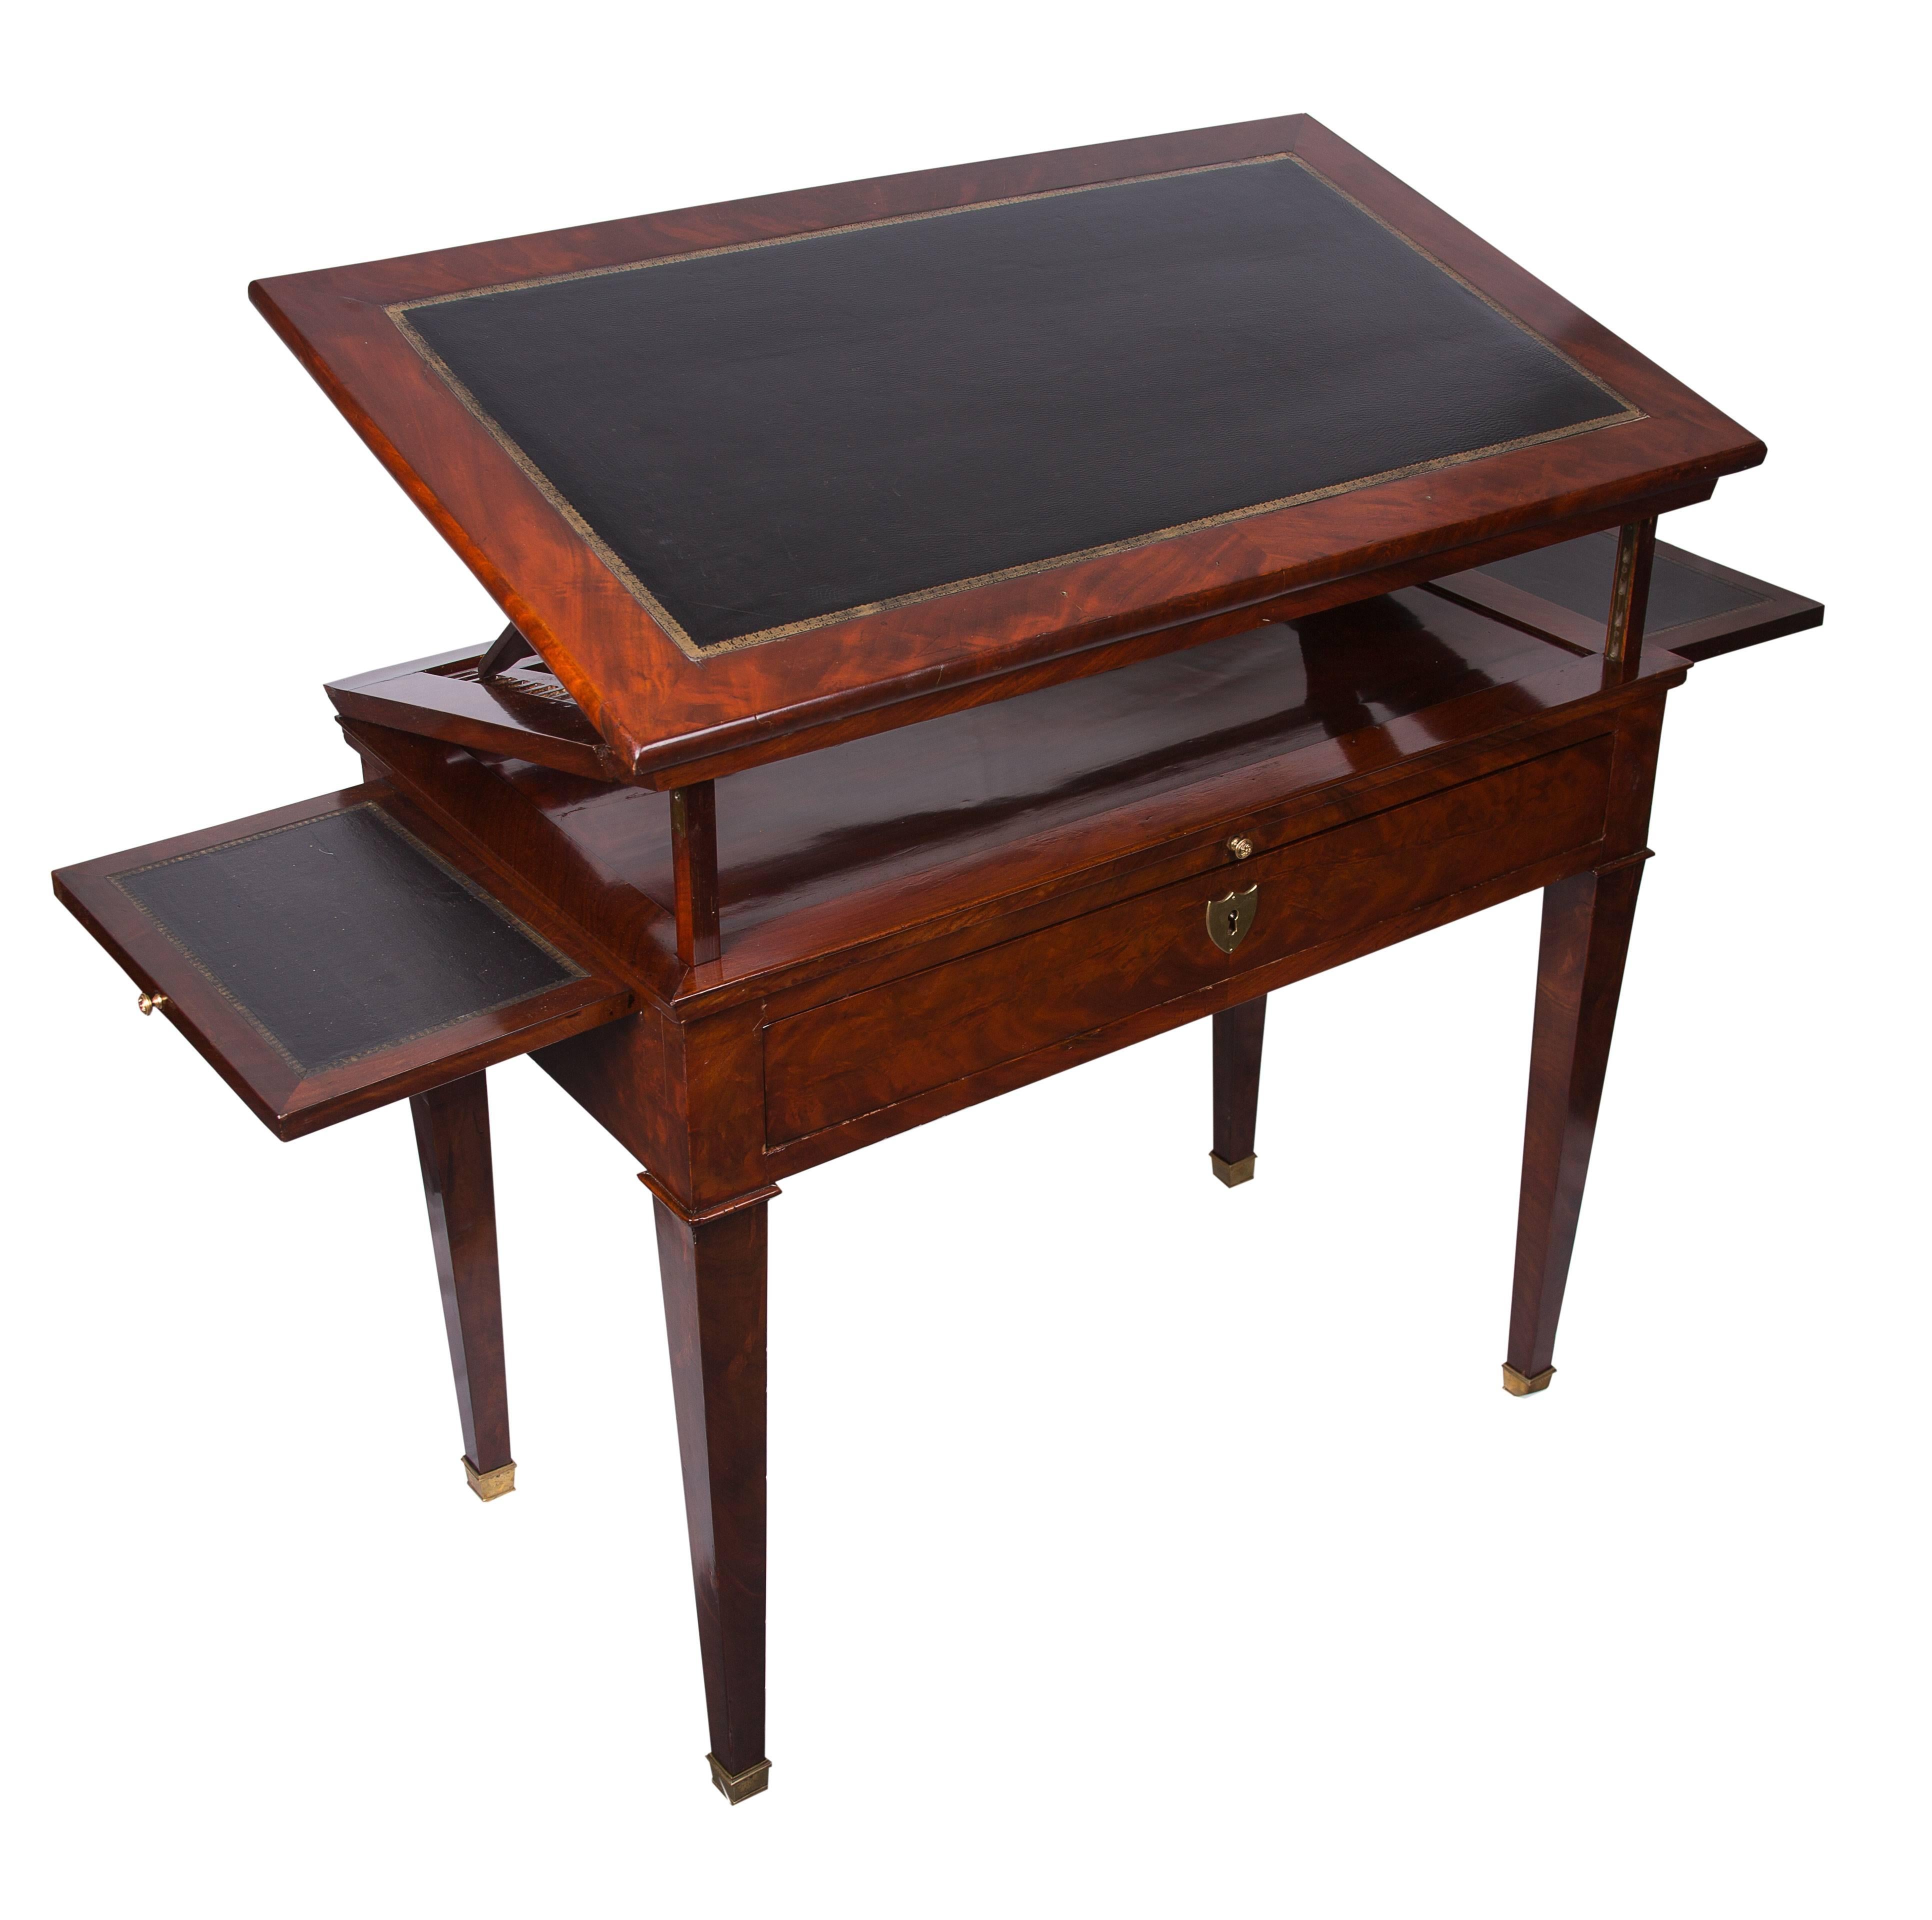 This is a superb early 19th century French Empire architect's desk and table having both a beautifully figured mahogany and tooled leather work surface. The table has a folding and ratcheted top above a frieze that is fitted with a central drawer